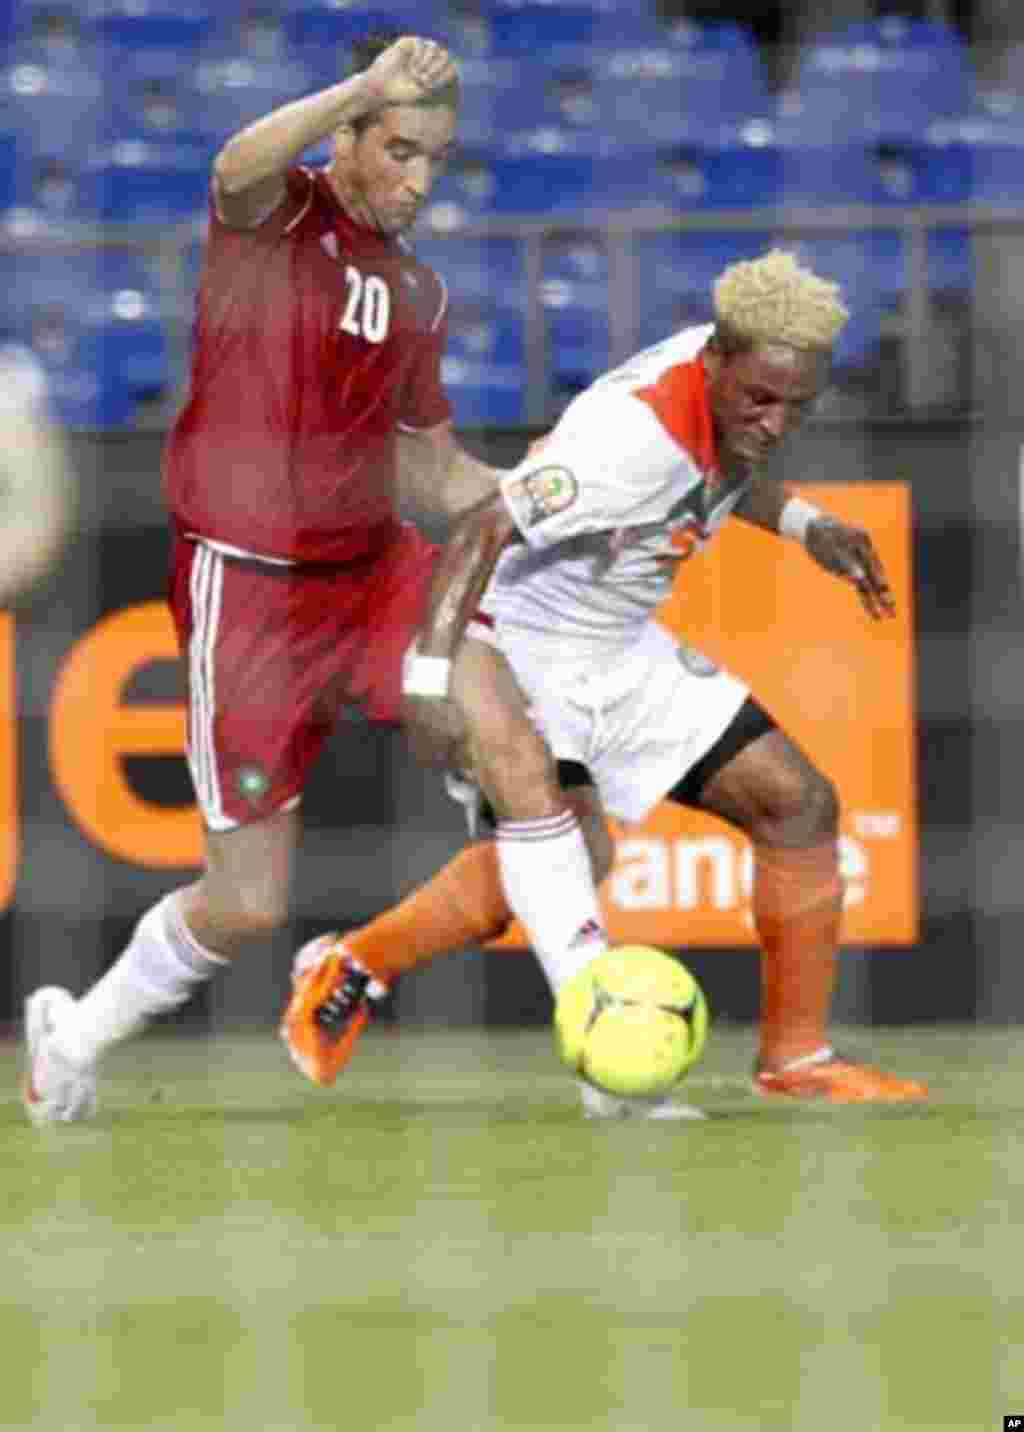 Morocco's Youssouf Hadji (20) is tackled by Niger's Jimmy Bulus during their final African Cup of Nations Group C soccer match at the Stade De L'Amitie Stadium in Libreville, Gabon January 31, 2012.